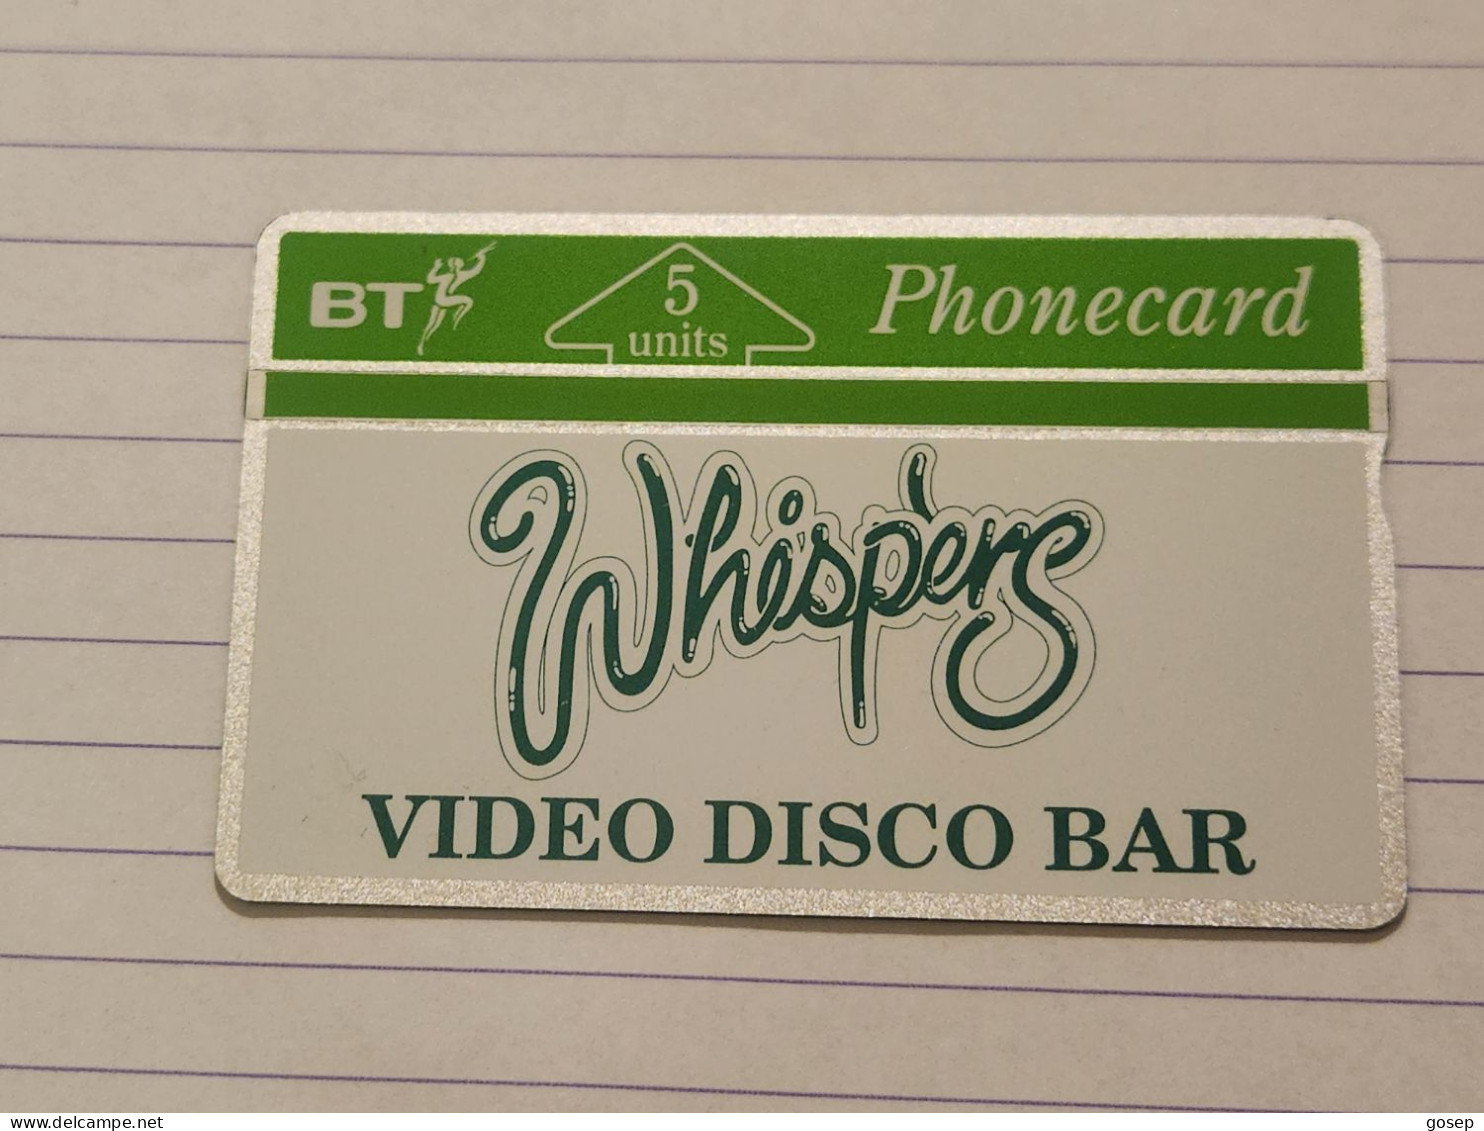 United Kingdom-(BTG-024)-whispers Video Disco Bar-(39)(5units)(201H10357)(tirage-500)(price Cataloge-8.00£mint) - BT General Issues